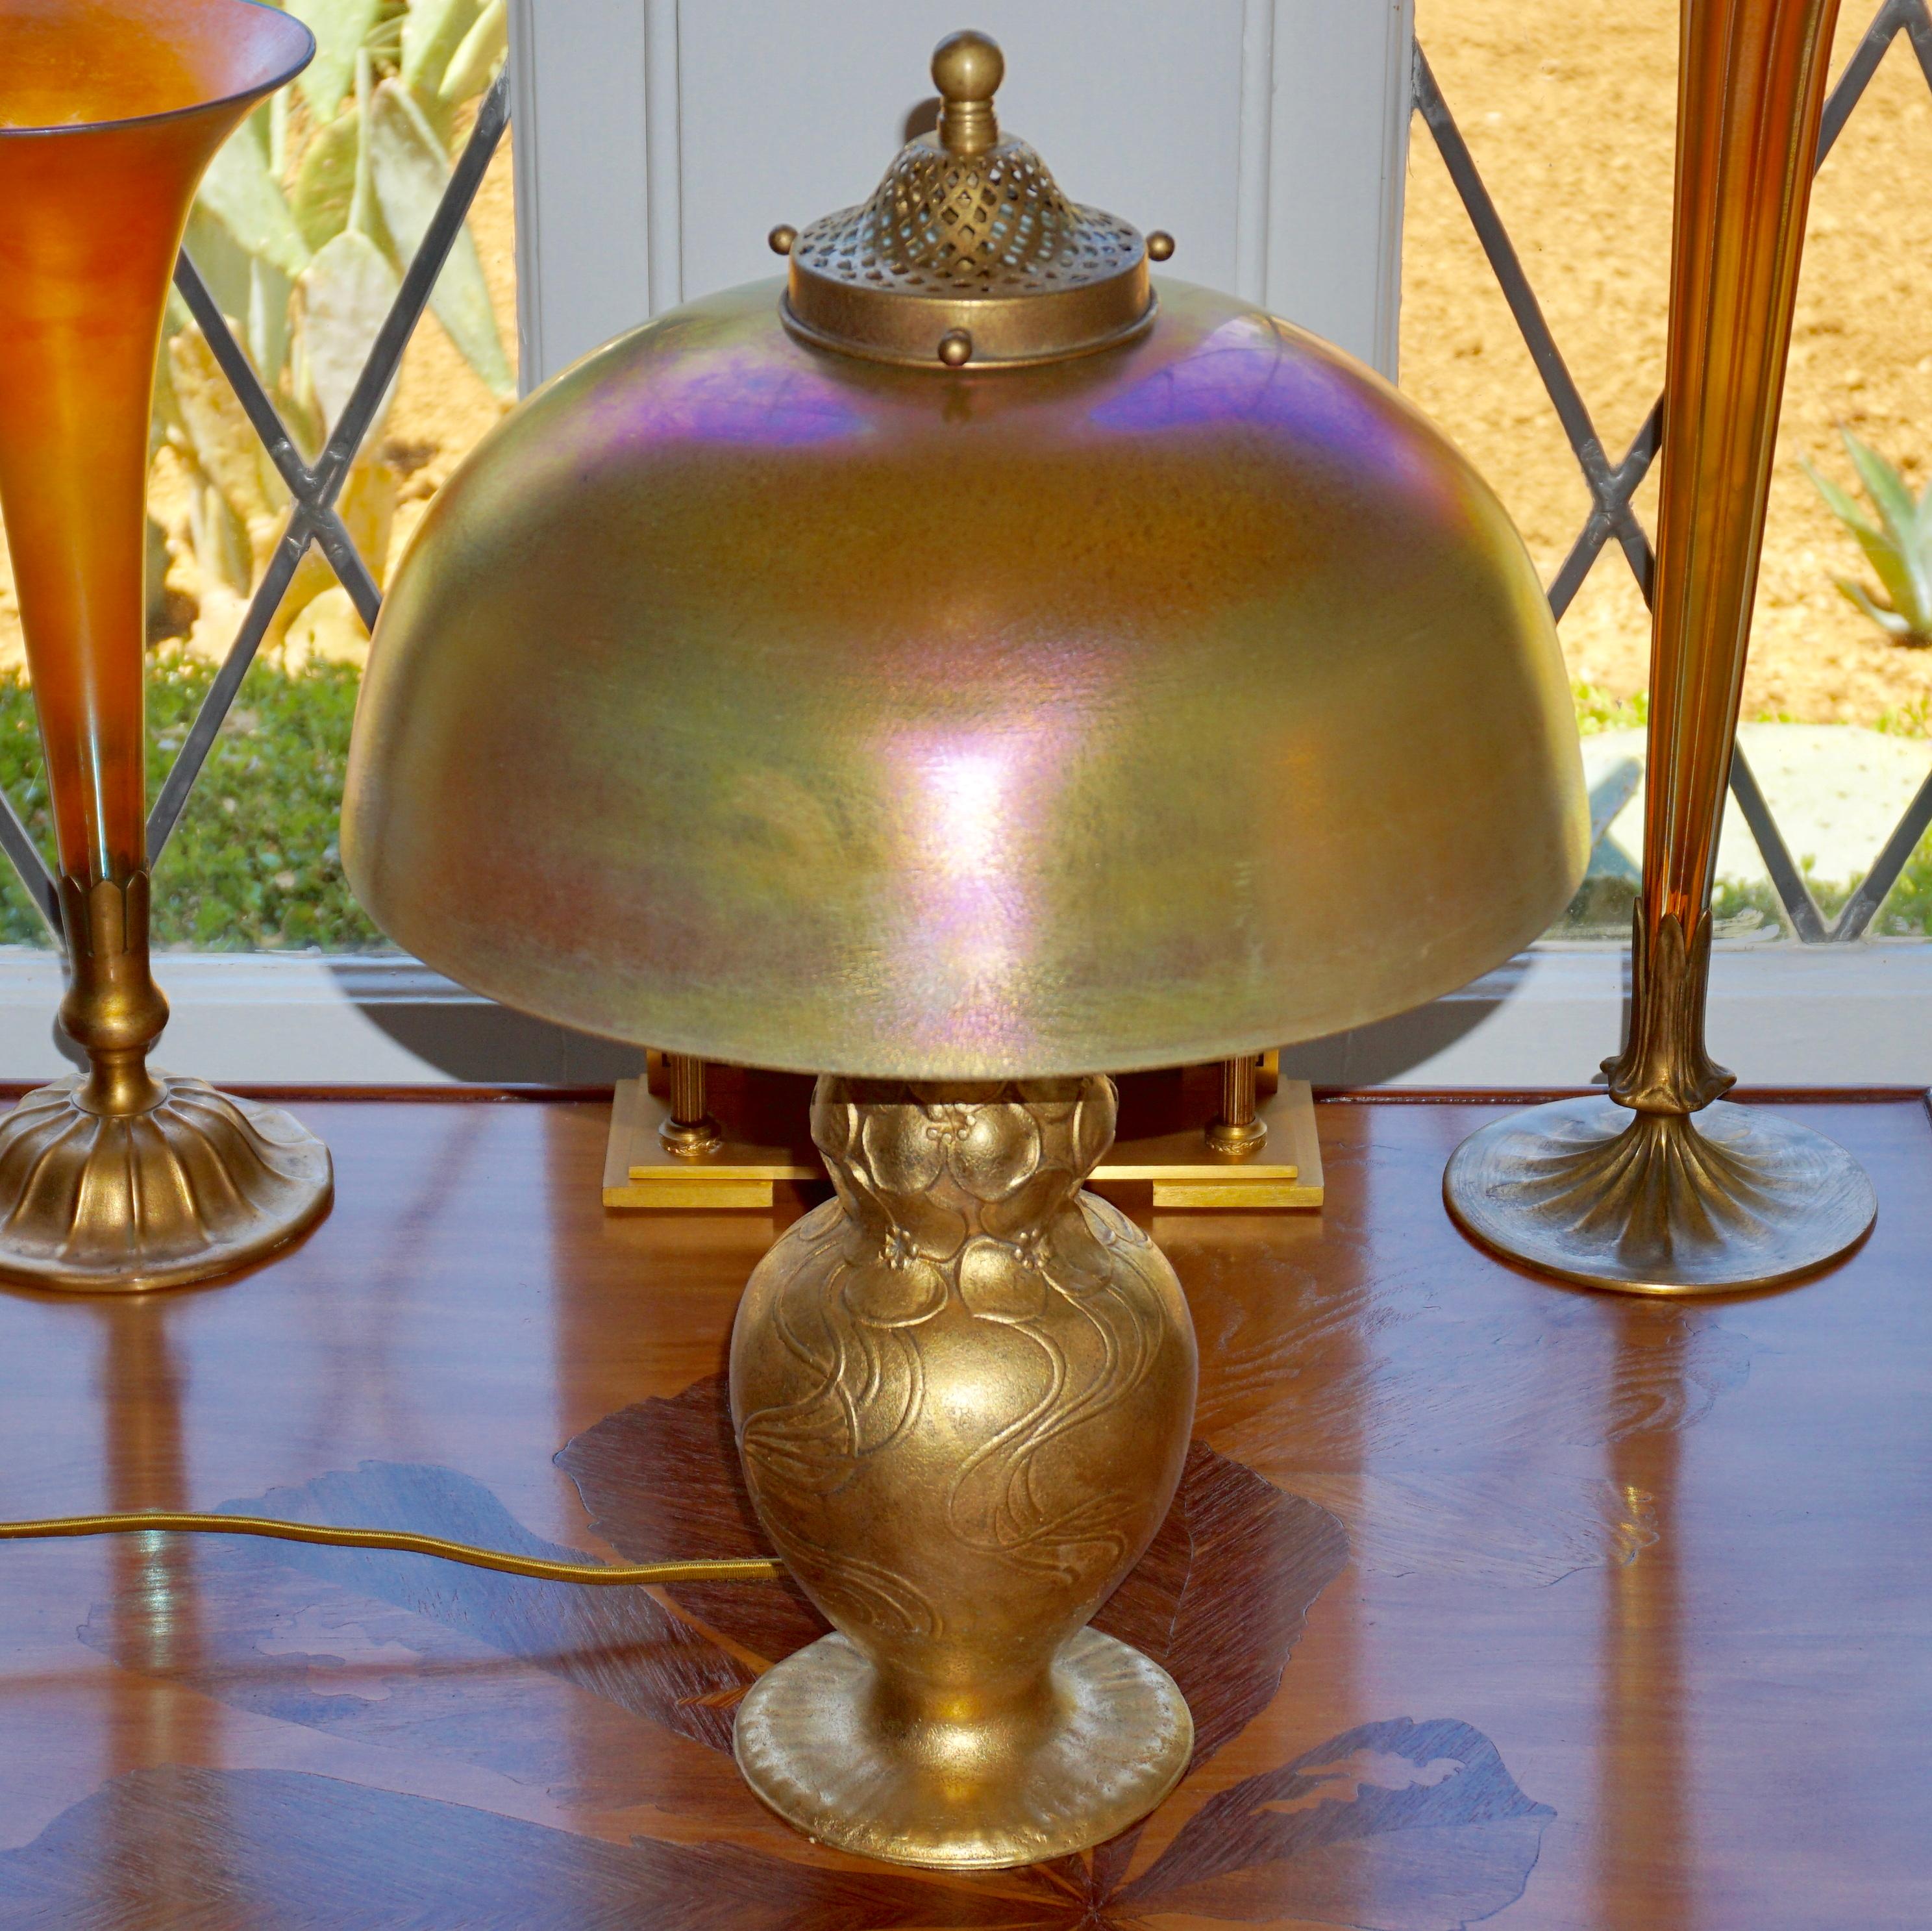 Tiffany Studios gold gilt bronze and favrile table lamp, circa 1910

This lamp will definitely be the center piece in your Library, study, office or living room. What sets this TSNY lamp apart from the rest is its rarity and sculptural beauty. Don’t